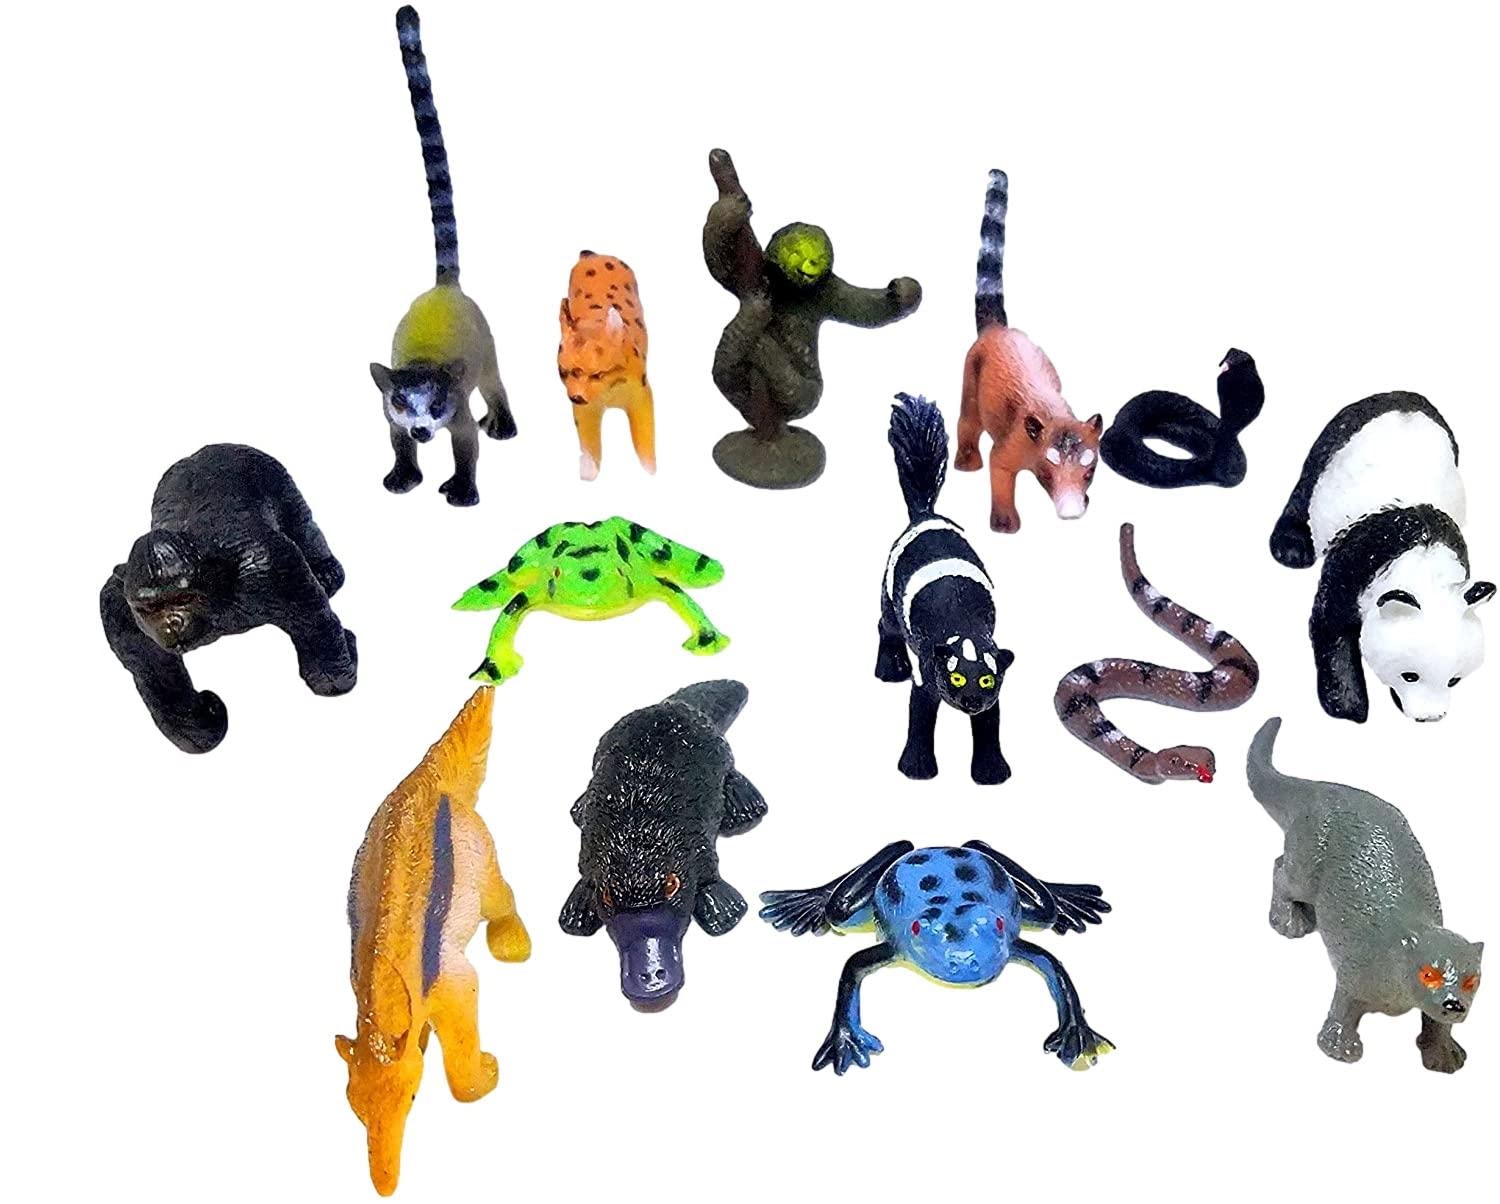 Mini Safari Jungle Animals Play Set, 28 ct - Assorted Creatures, Party Favors, Educational Counting & Sensory Toys